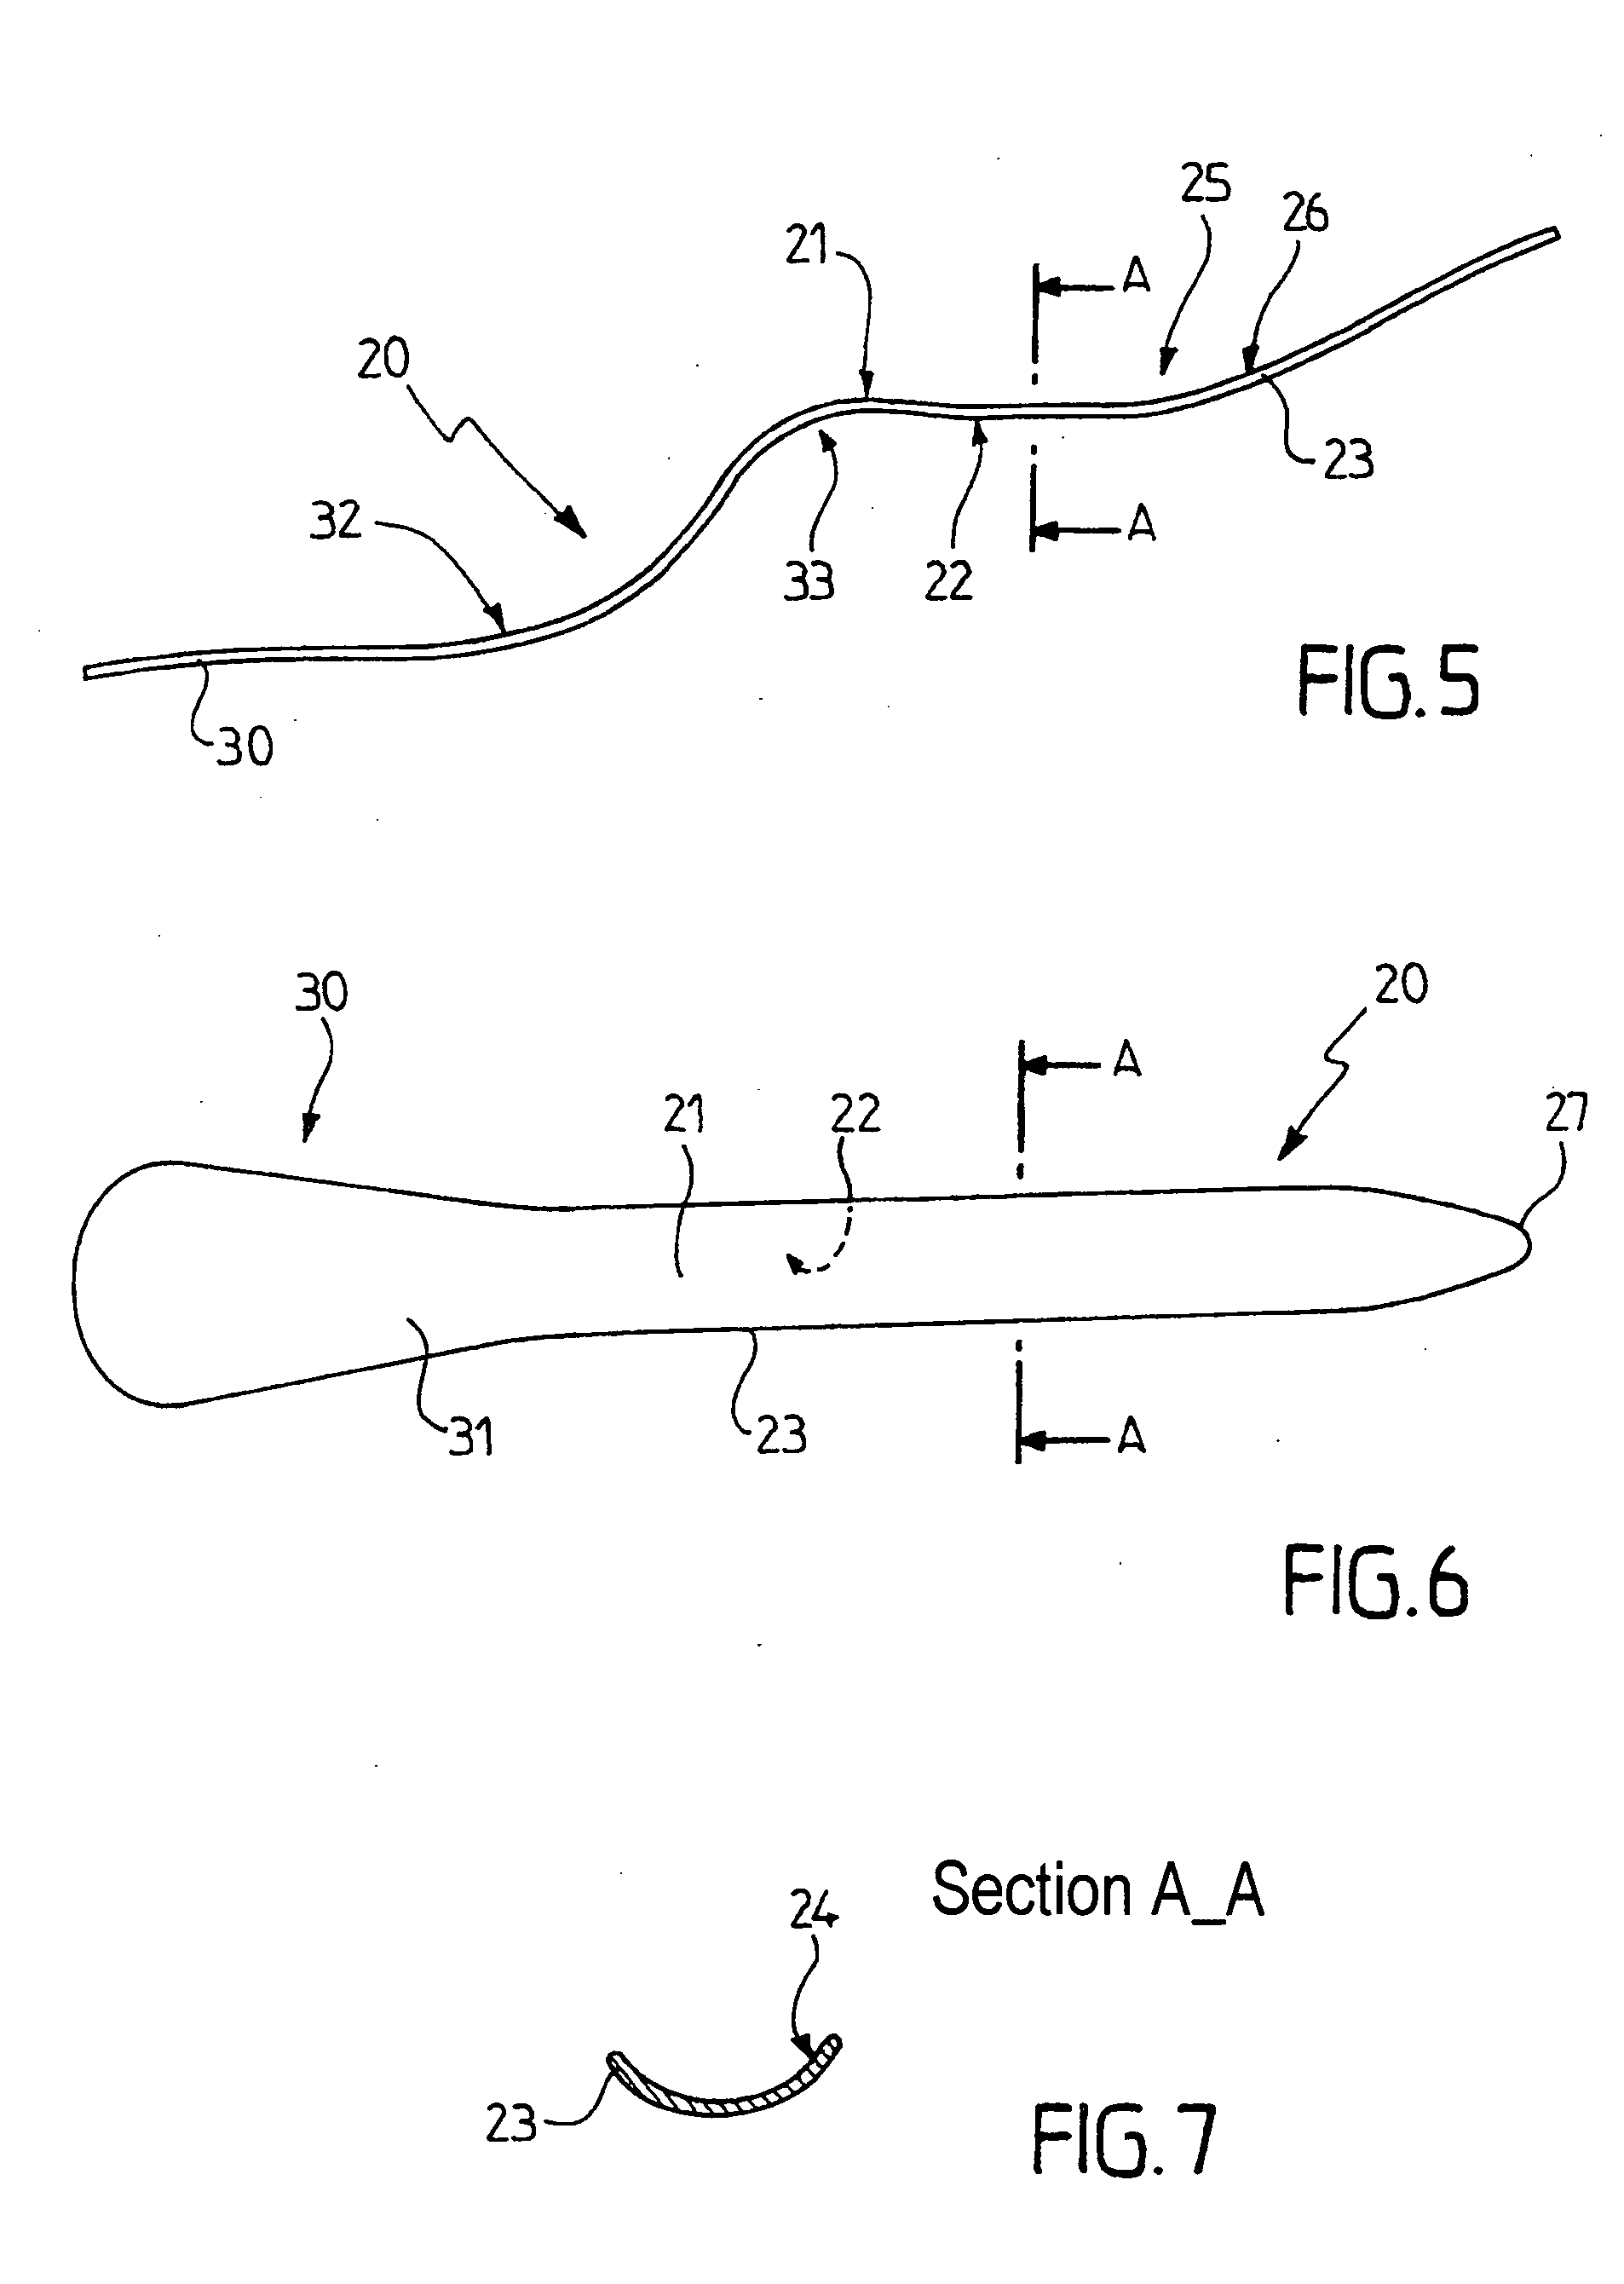 Prosthetic implant for sub-urethral support, an instrument, an insertion kit, and a surgical method for implanting it